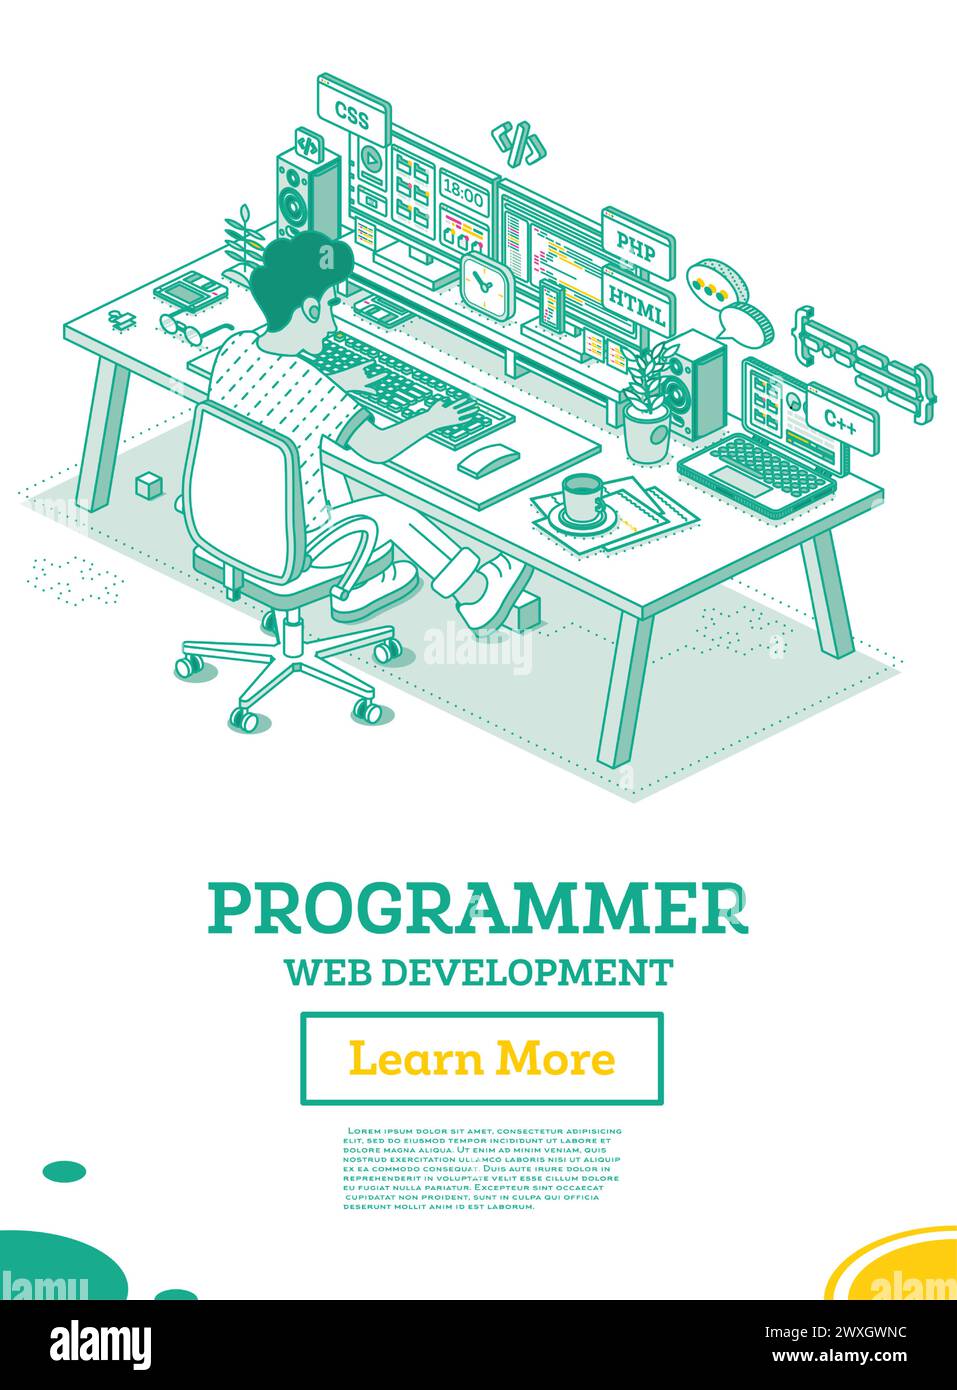 Programmer. Frontend or Backend Developer Sit on Chair with Wheels in Front of Two Monitors with Code. Html, Css, Php, C++ Programming Code. Creating Stock Vector